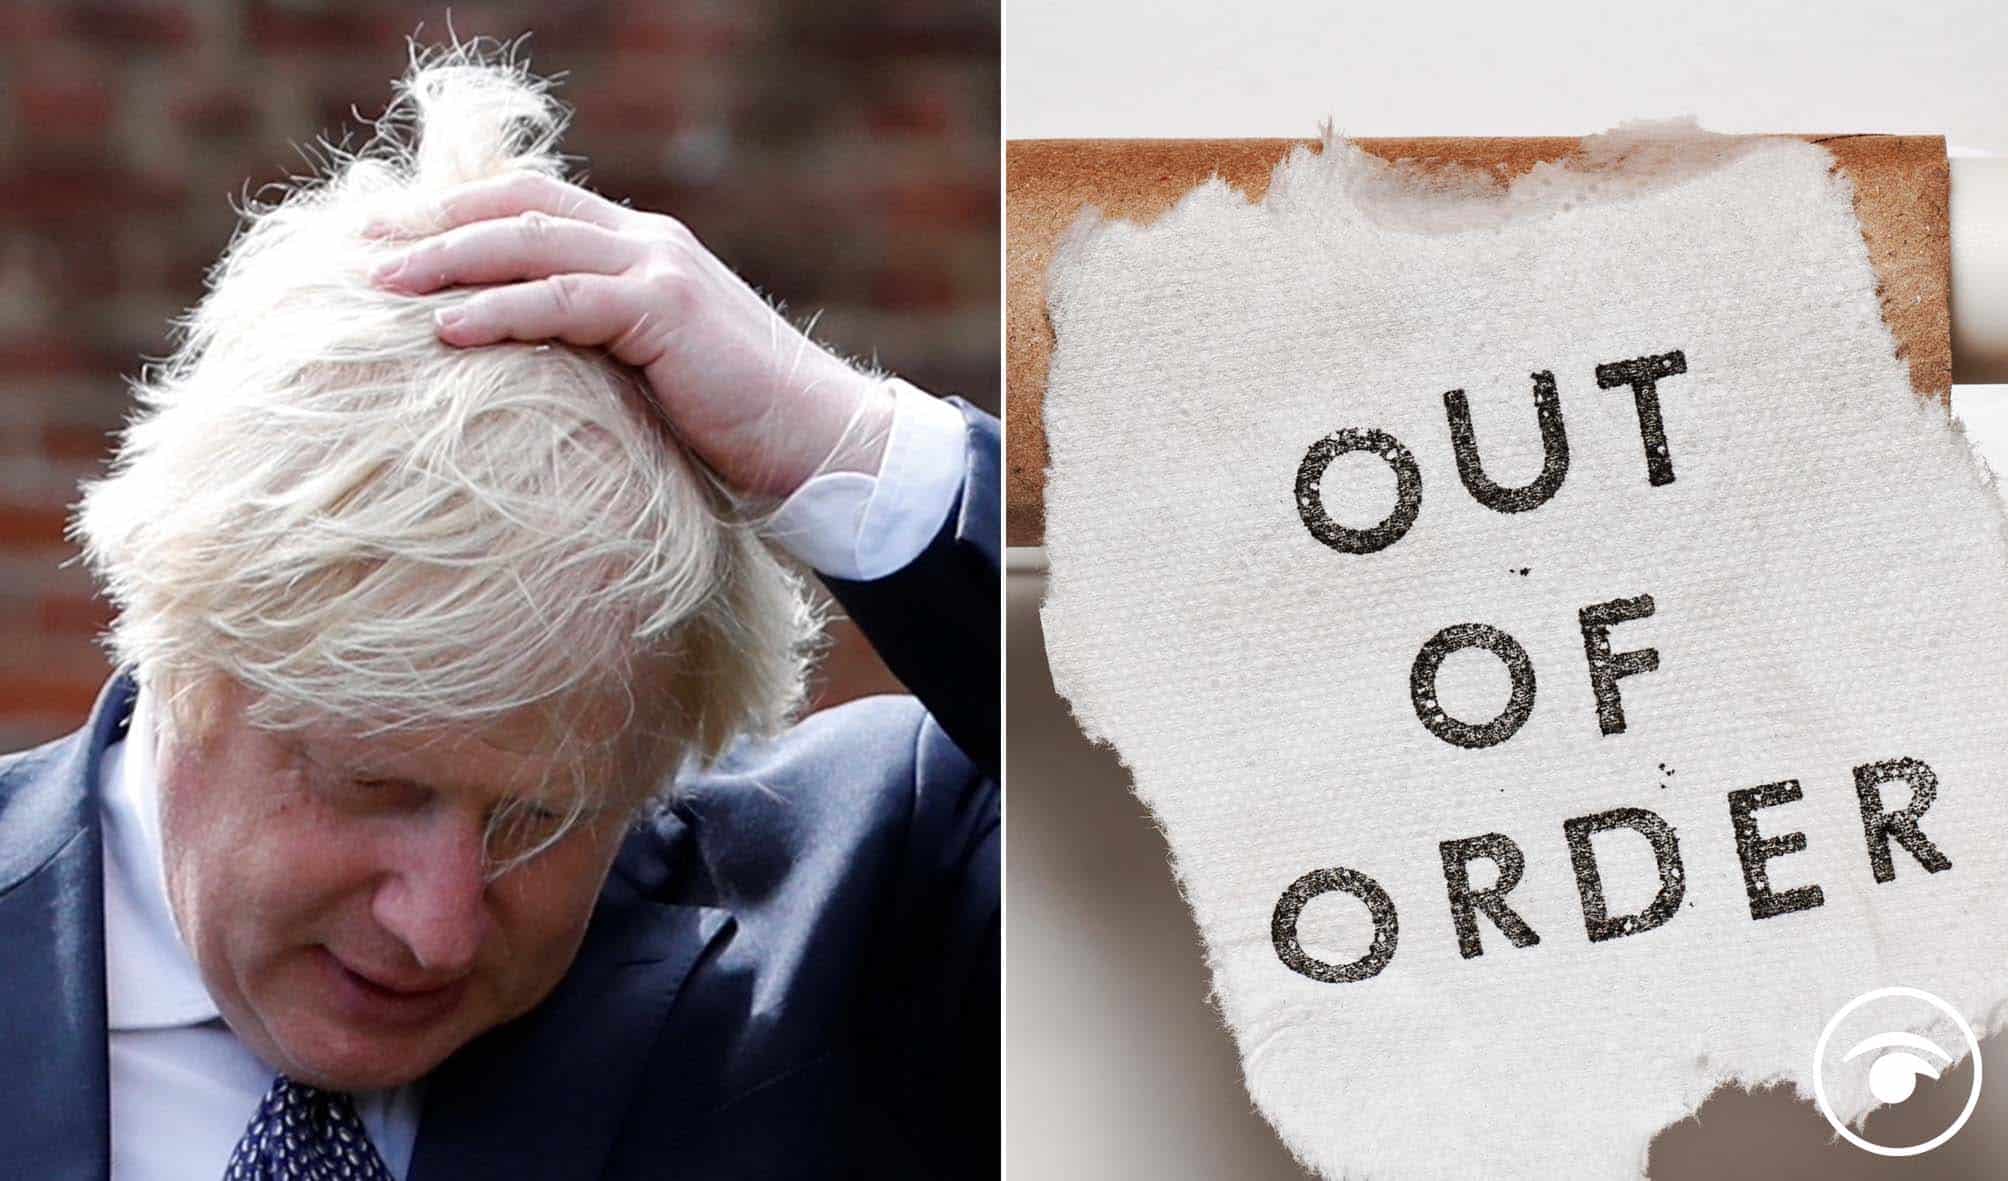 ‘Poo titles for Boris’ trends – we got our hands dirty looking for best reactions